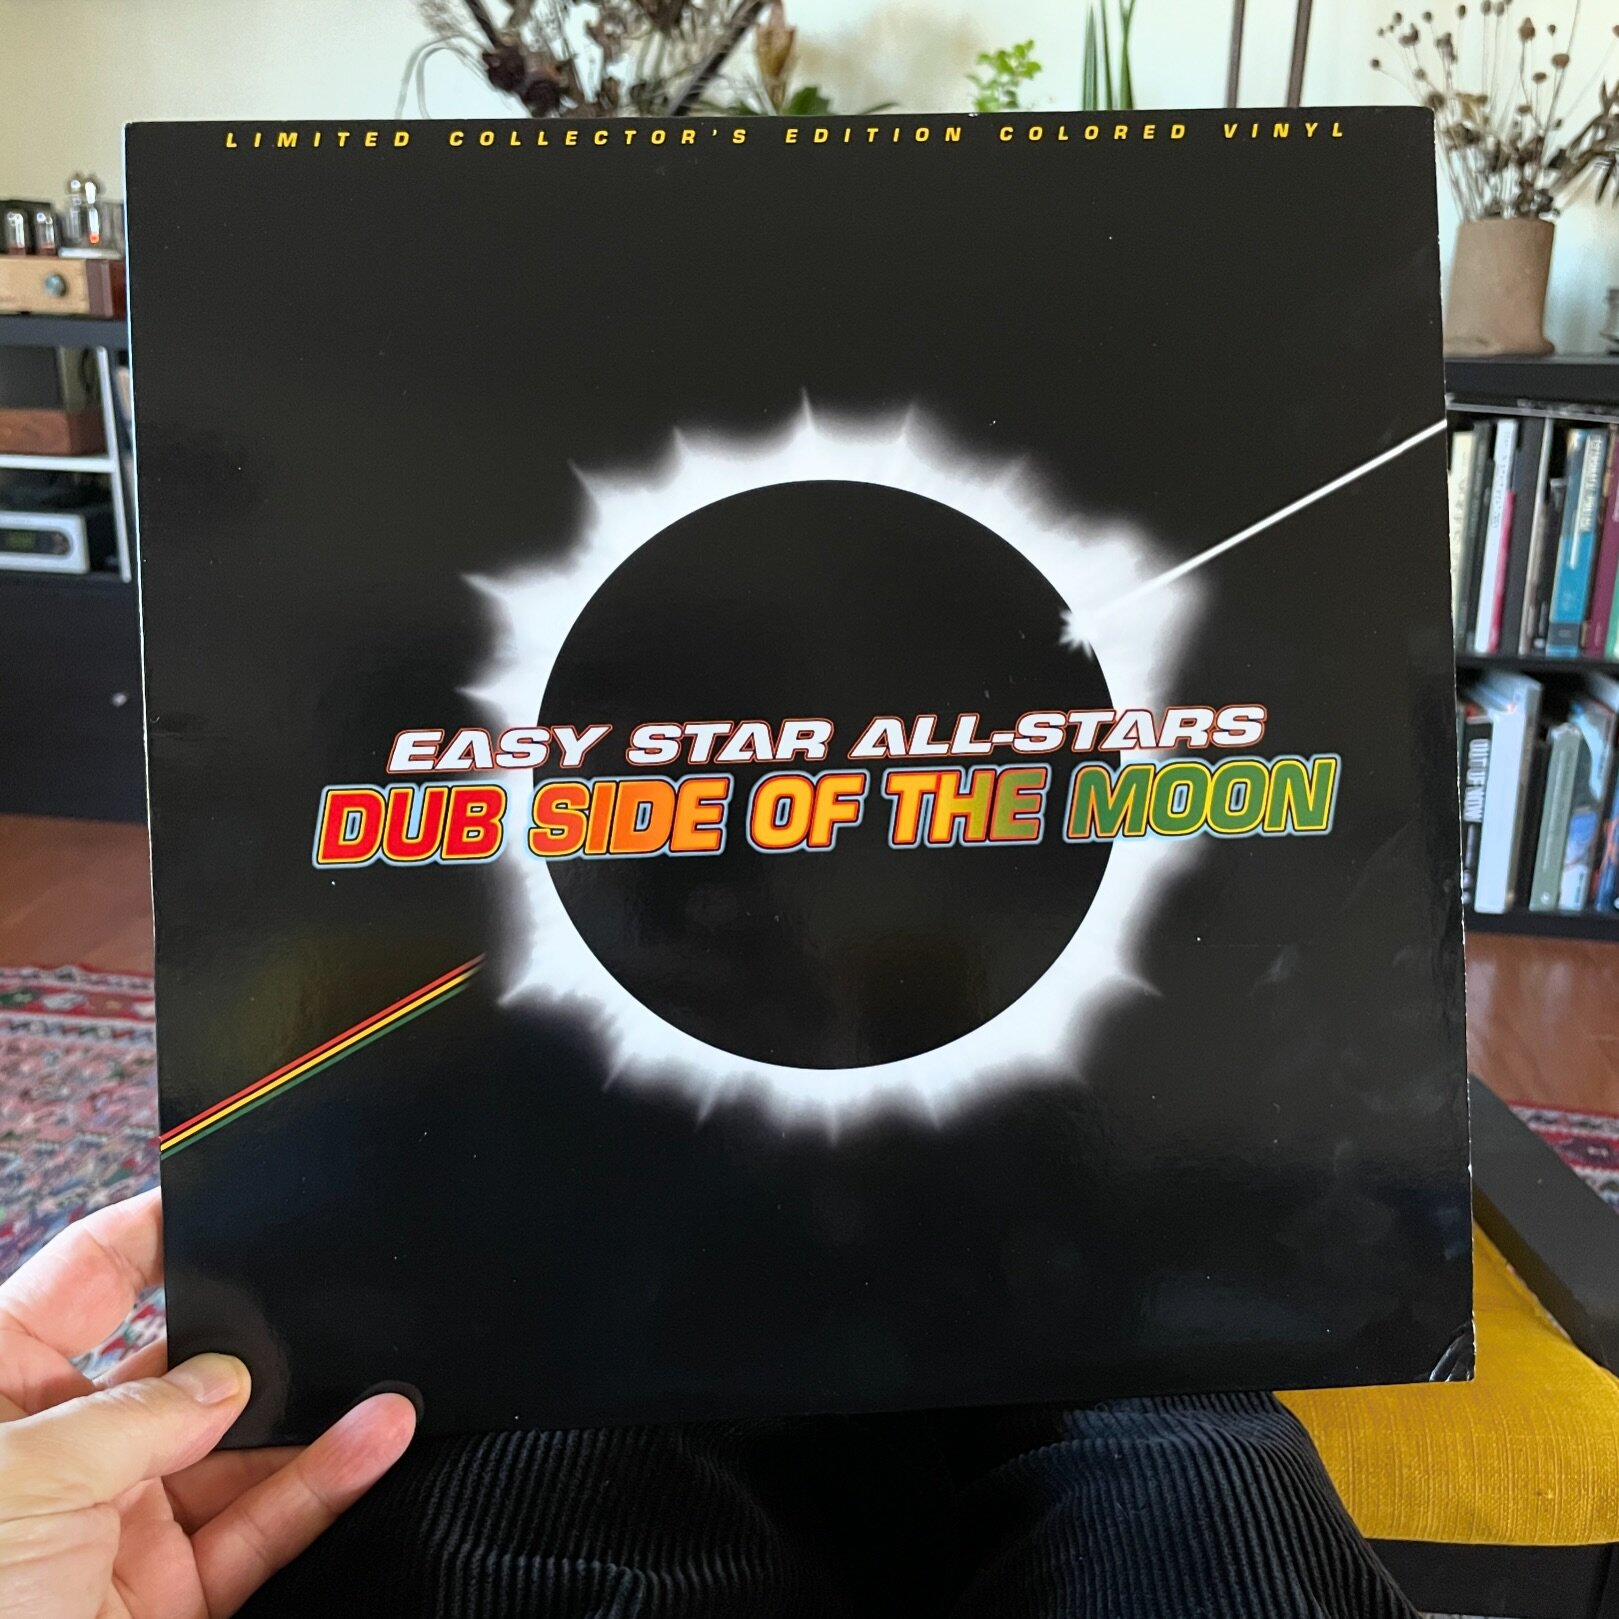 Perhaps one of the most unexpected and exquisite dub takeovers ever, just arrived in the post! #dubsideofthemoon